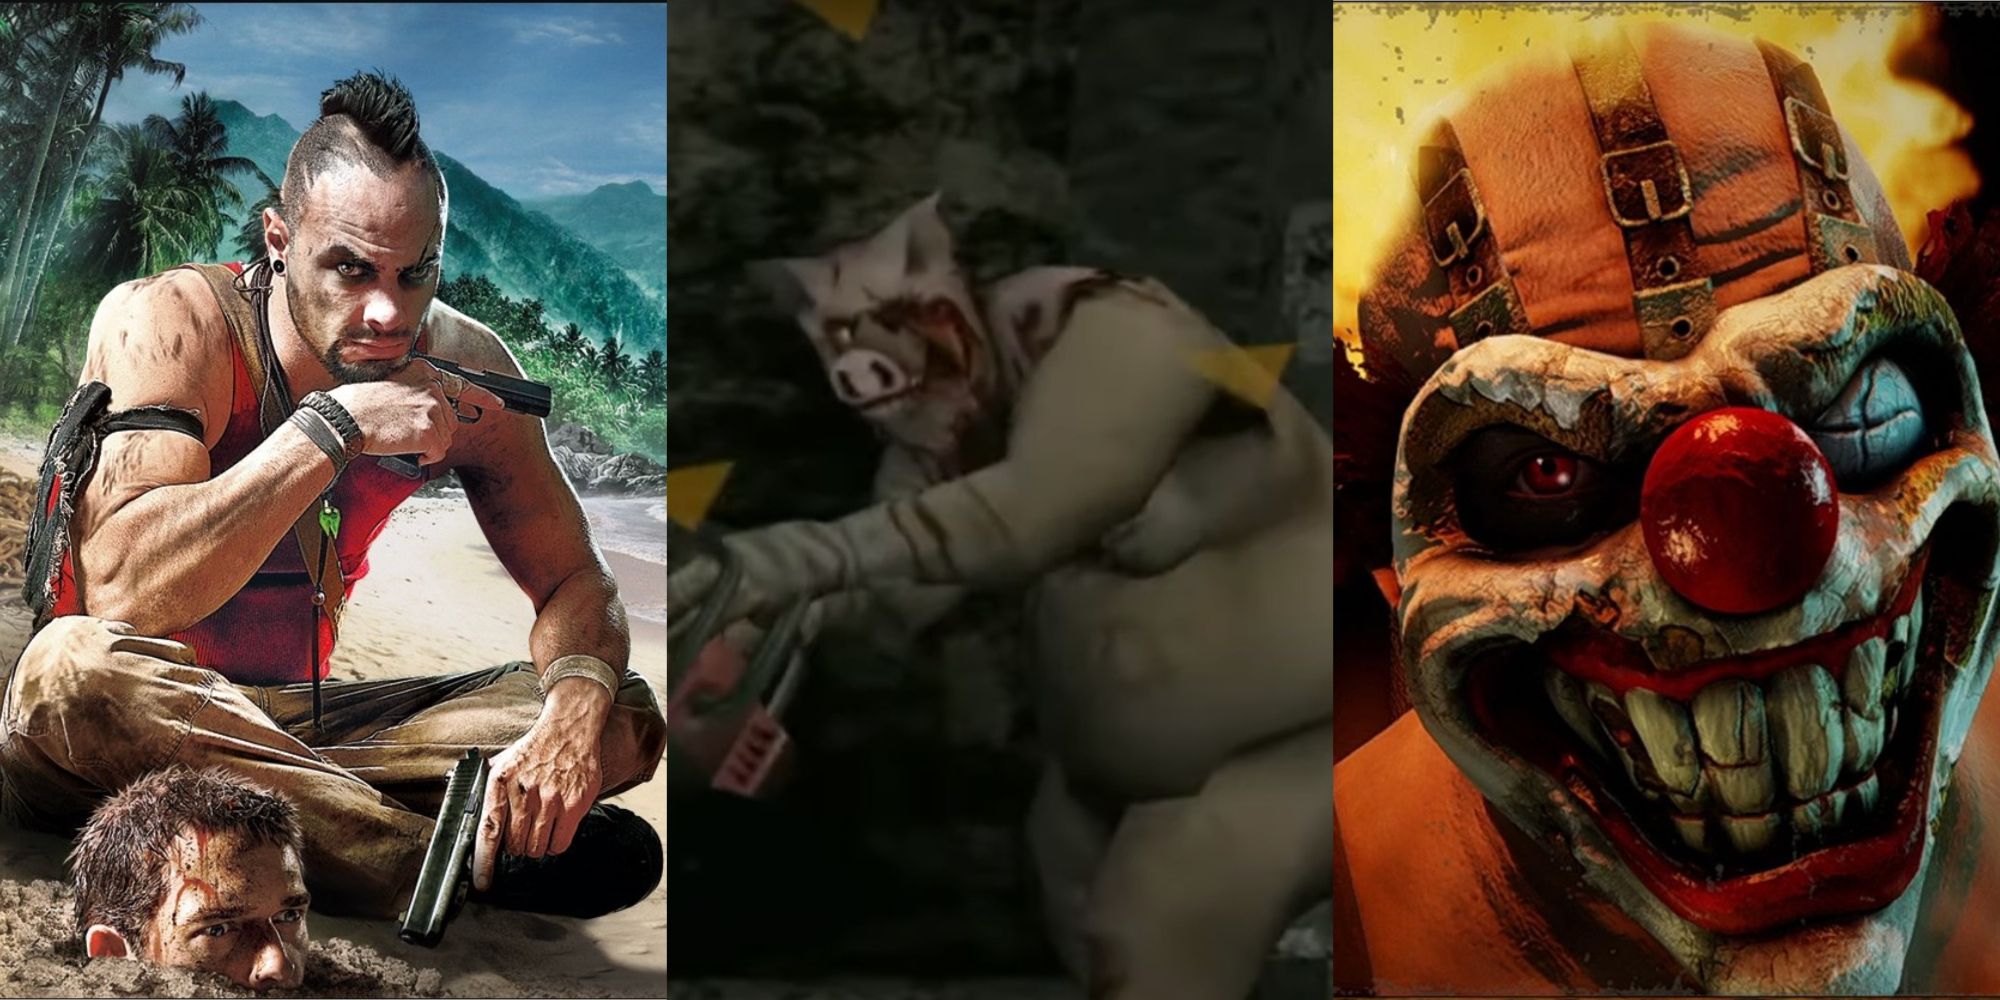 Vaas Montenegro from Far Cry 3, Piggsy from Manhunt, Sweet Tooth from Twisted Metal